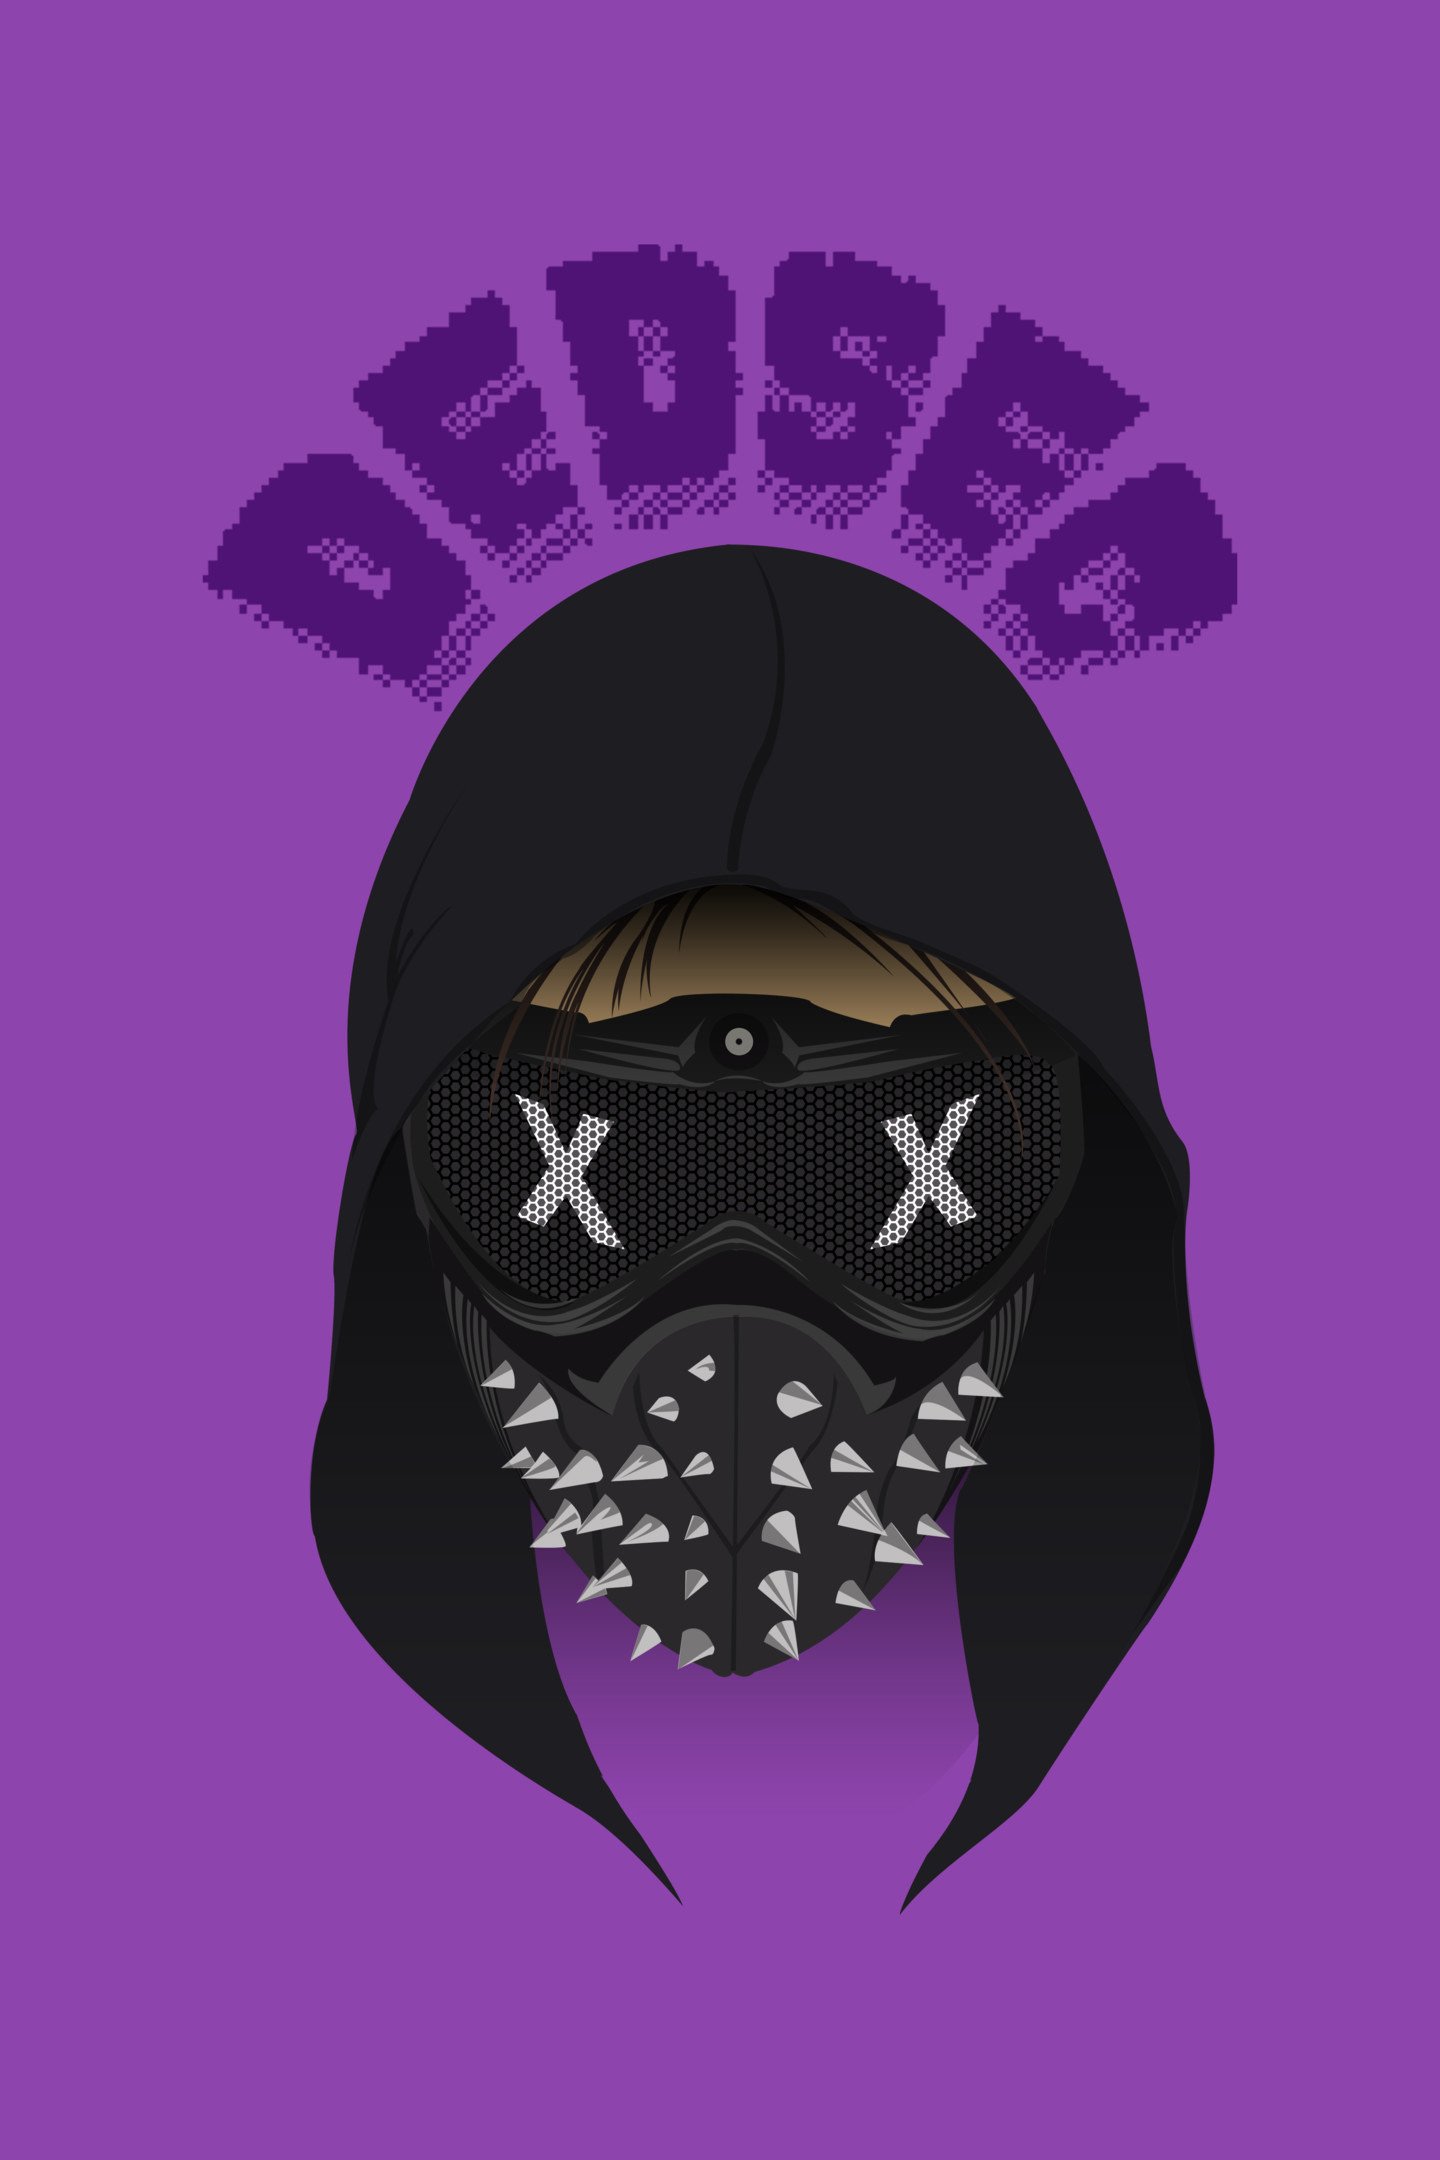 Download wallpaper 1440x2630 dedsec, watch dogs minimal, purple, video game, samsung galaxy note 1440x2630 HD background, 3400